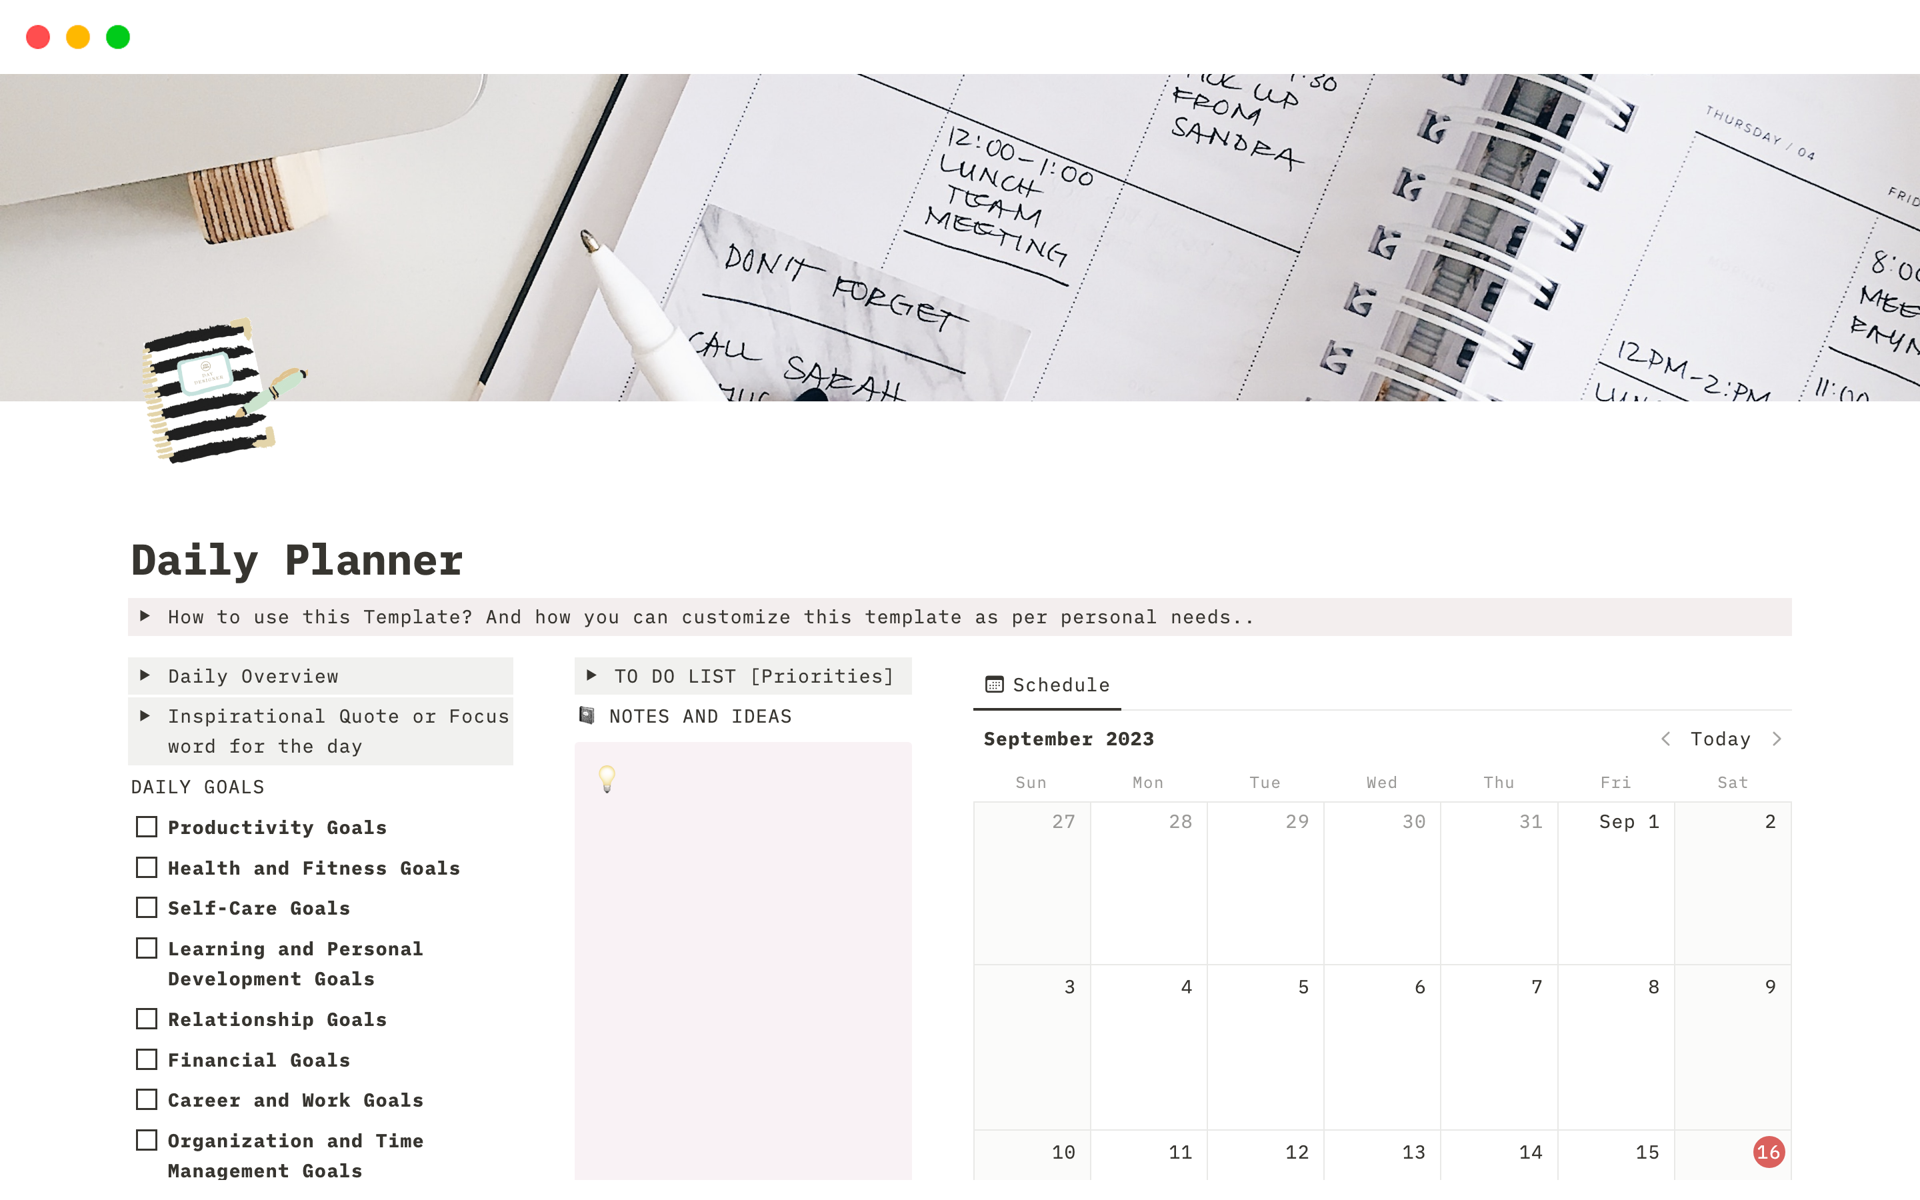 Are you ready to supercharge your daily productivity and achieve your goals with ease? Introducing "Your Daily Productivity Planner" – the ultimate tool to help you organize, prioritize, and conquer your day like a pro.